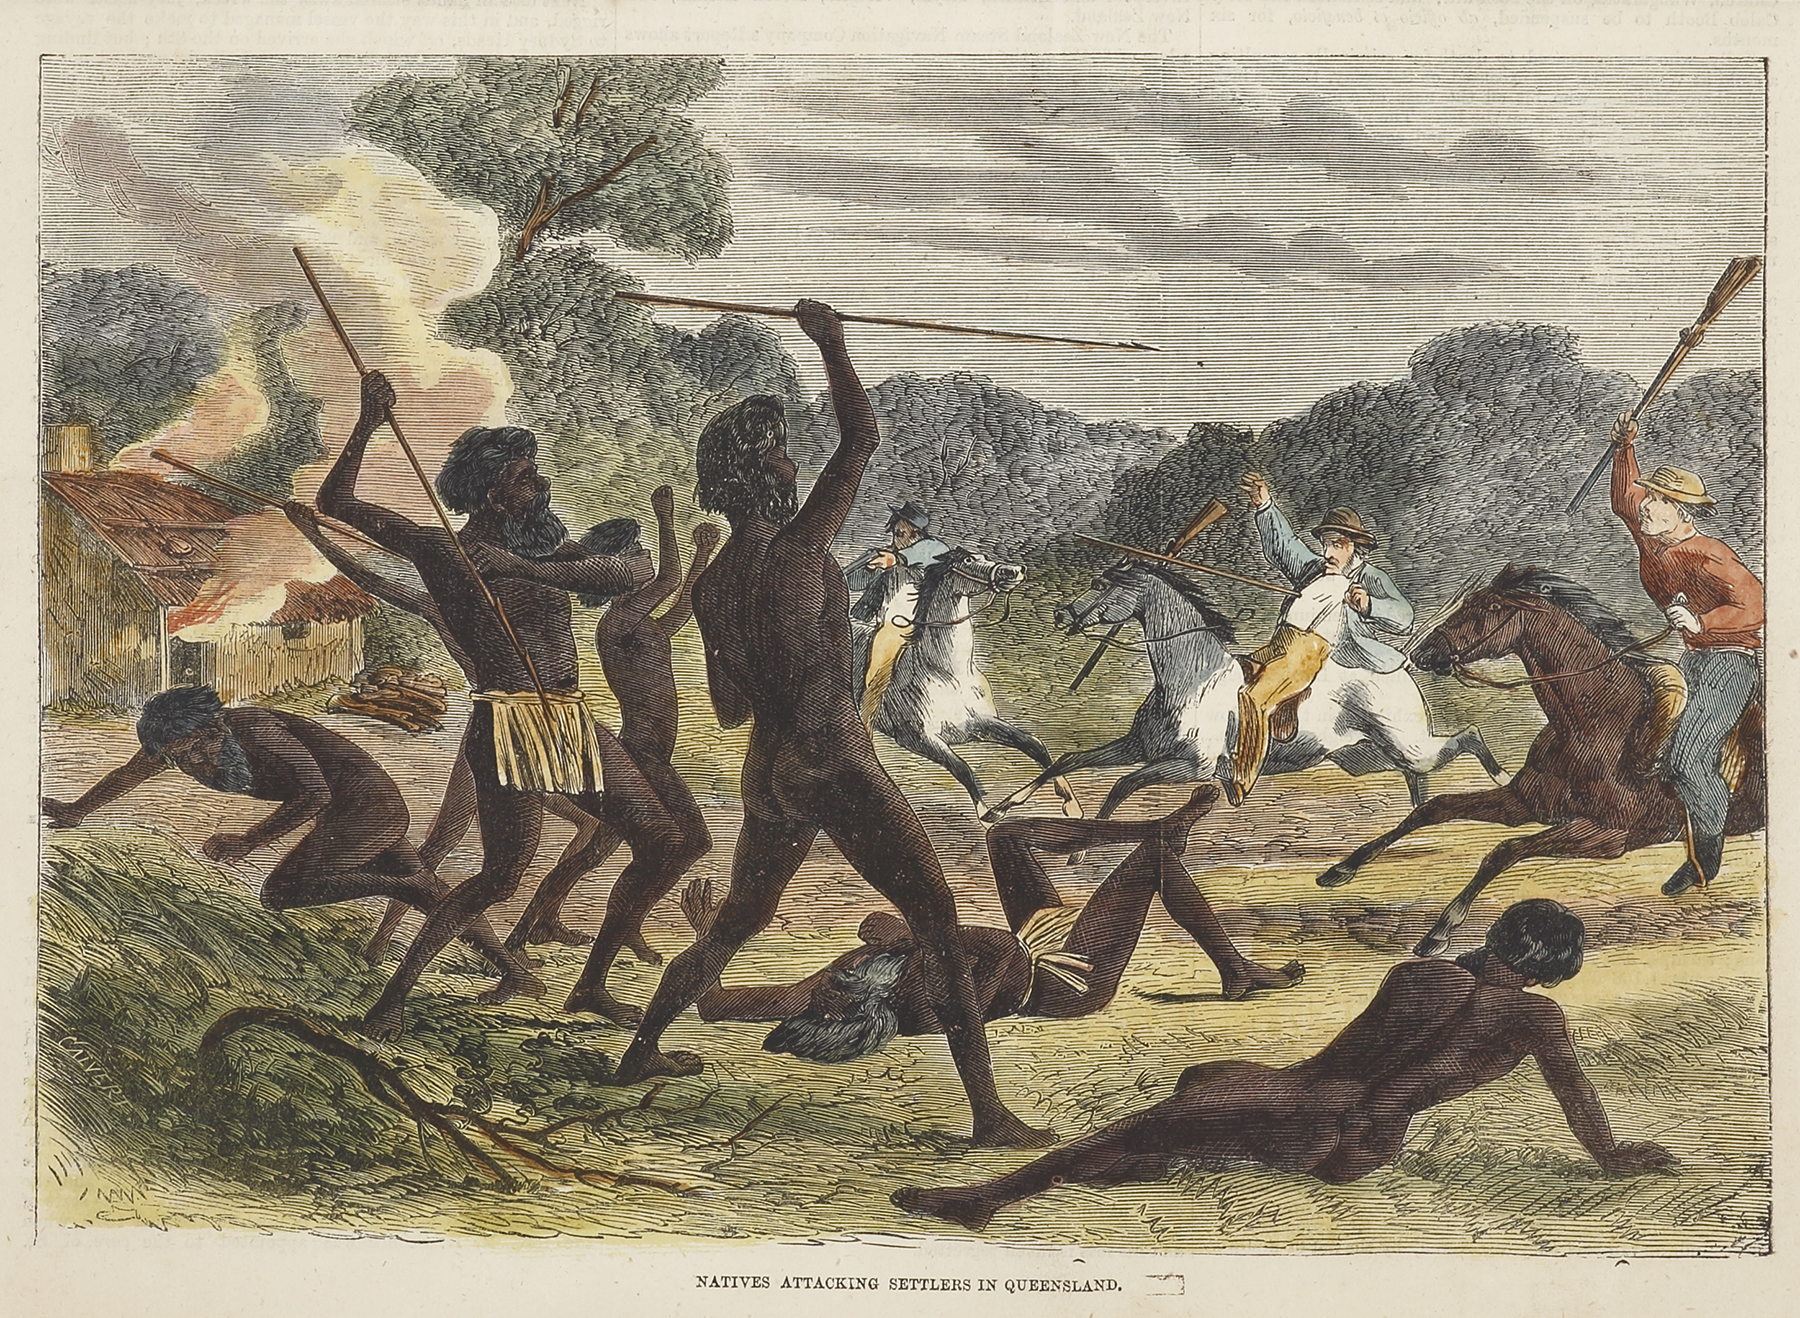 Natives Attacking Settlers in Queensland. - Antique Print from 1867